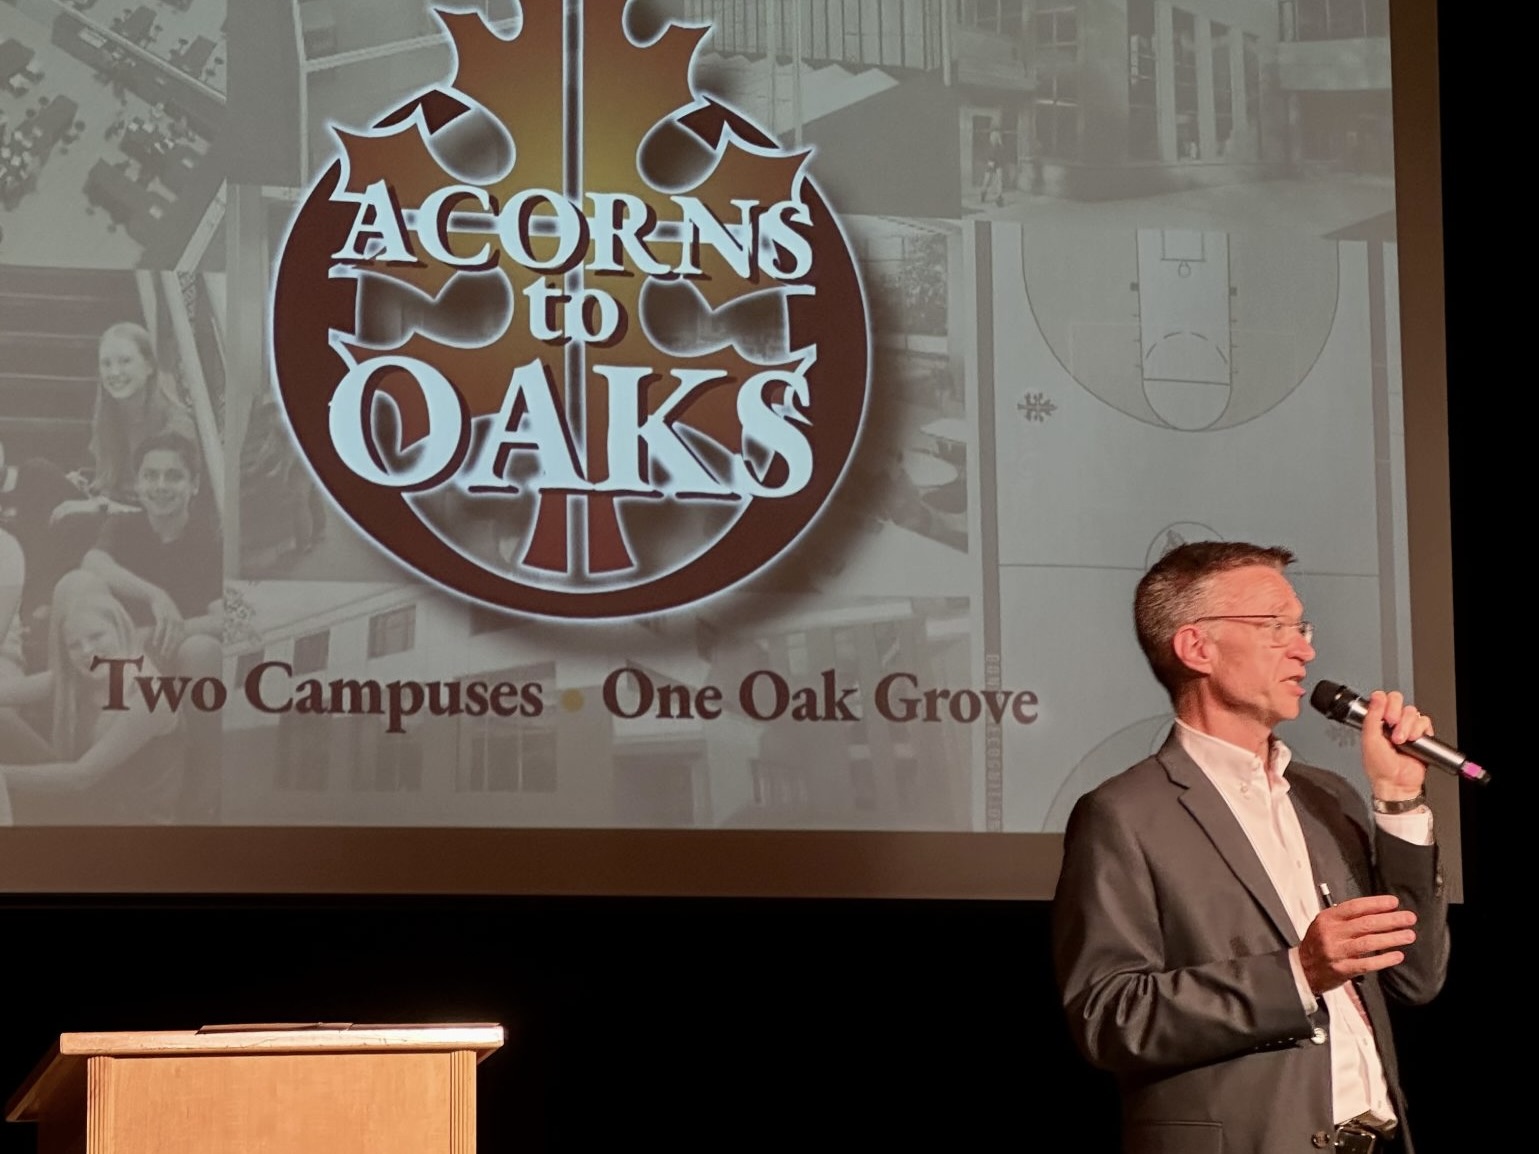 President of Oak Grove Bob Otterson giving a speech on stage